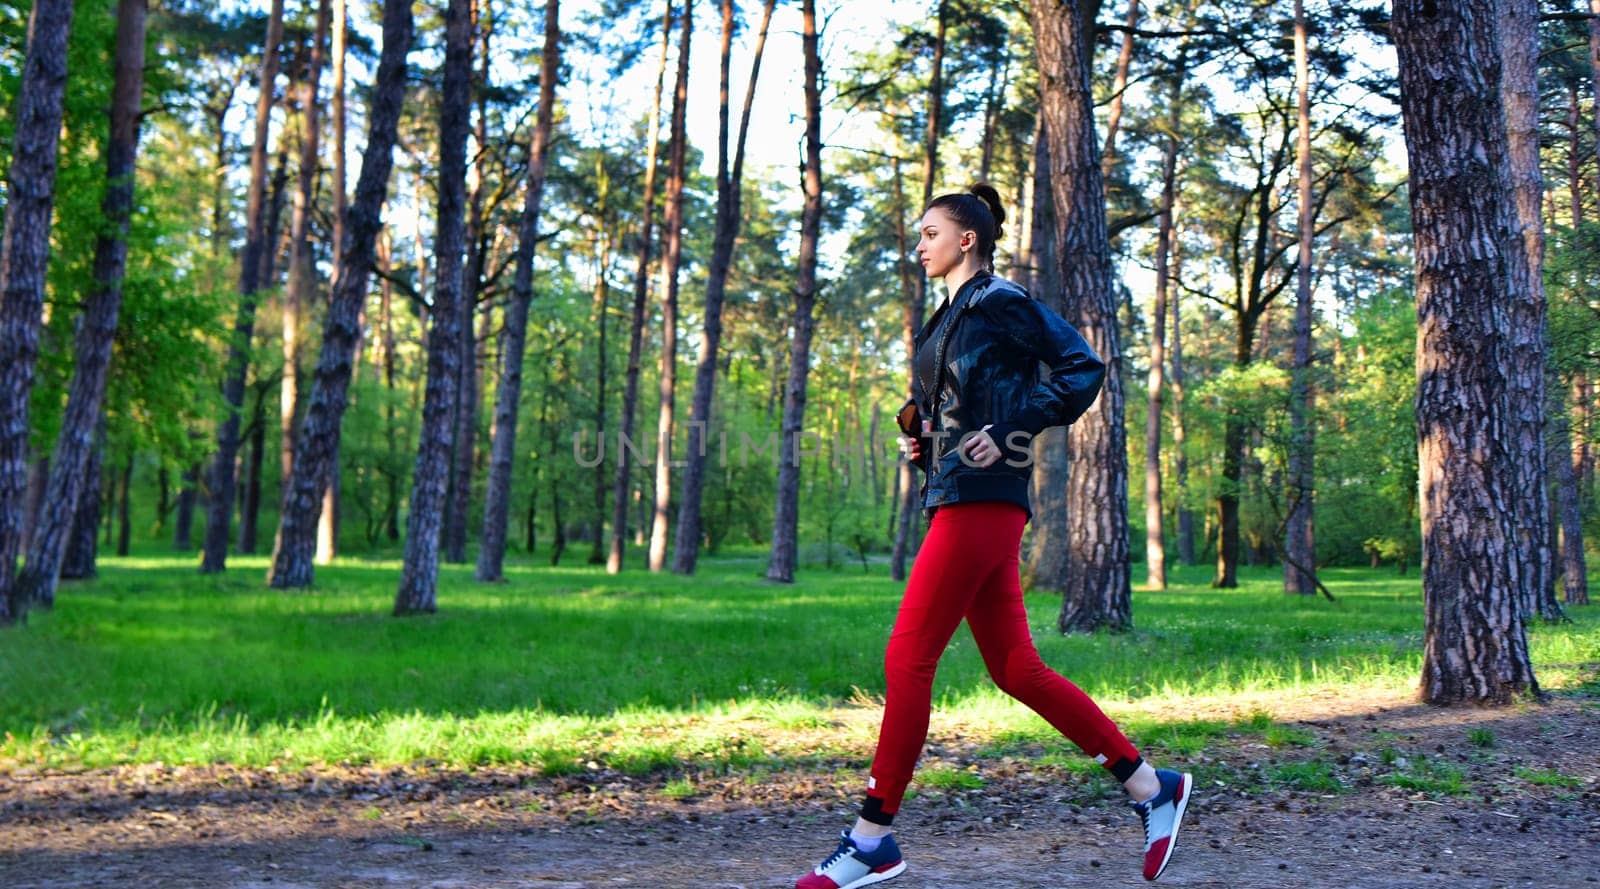 A young woman on a jog in the park. Jogging in nature